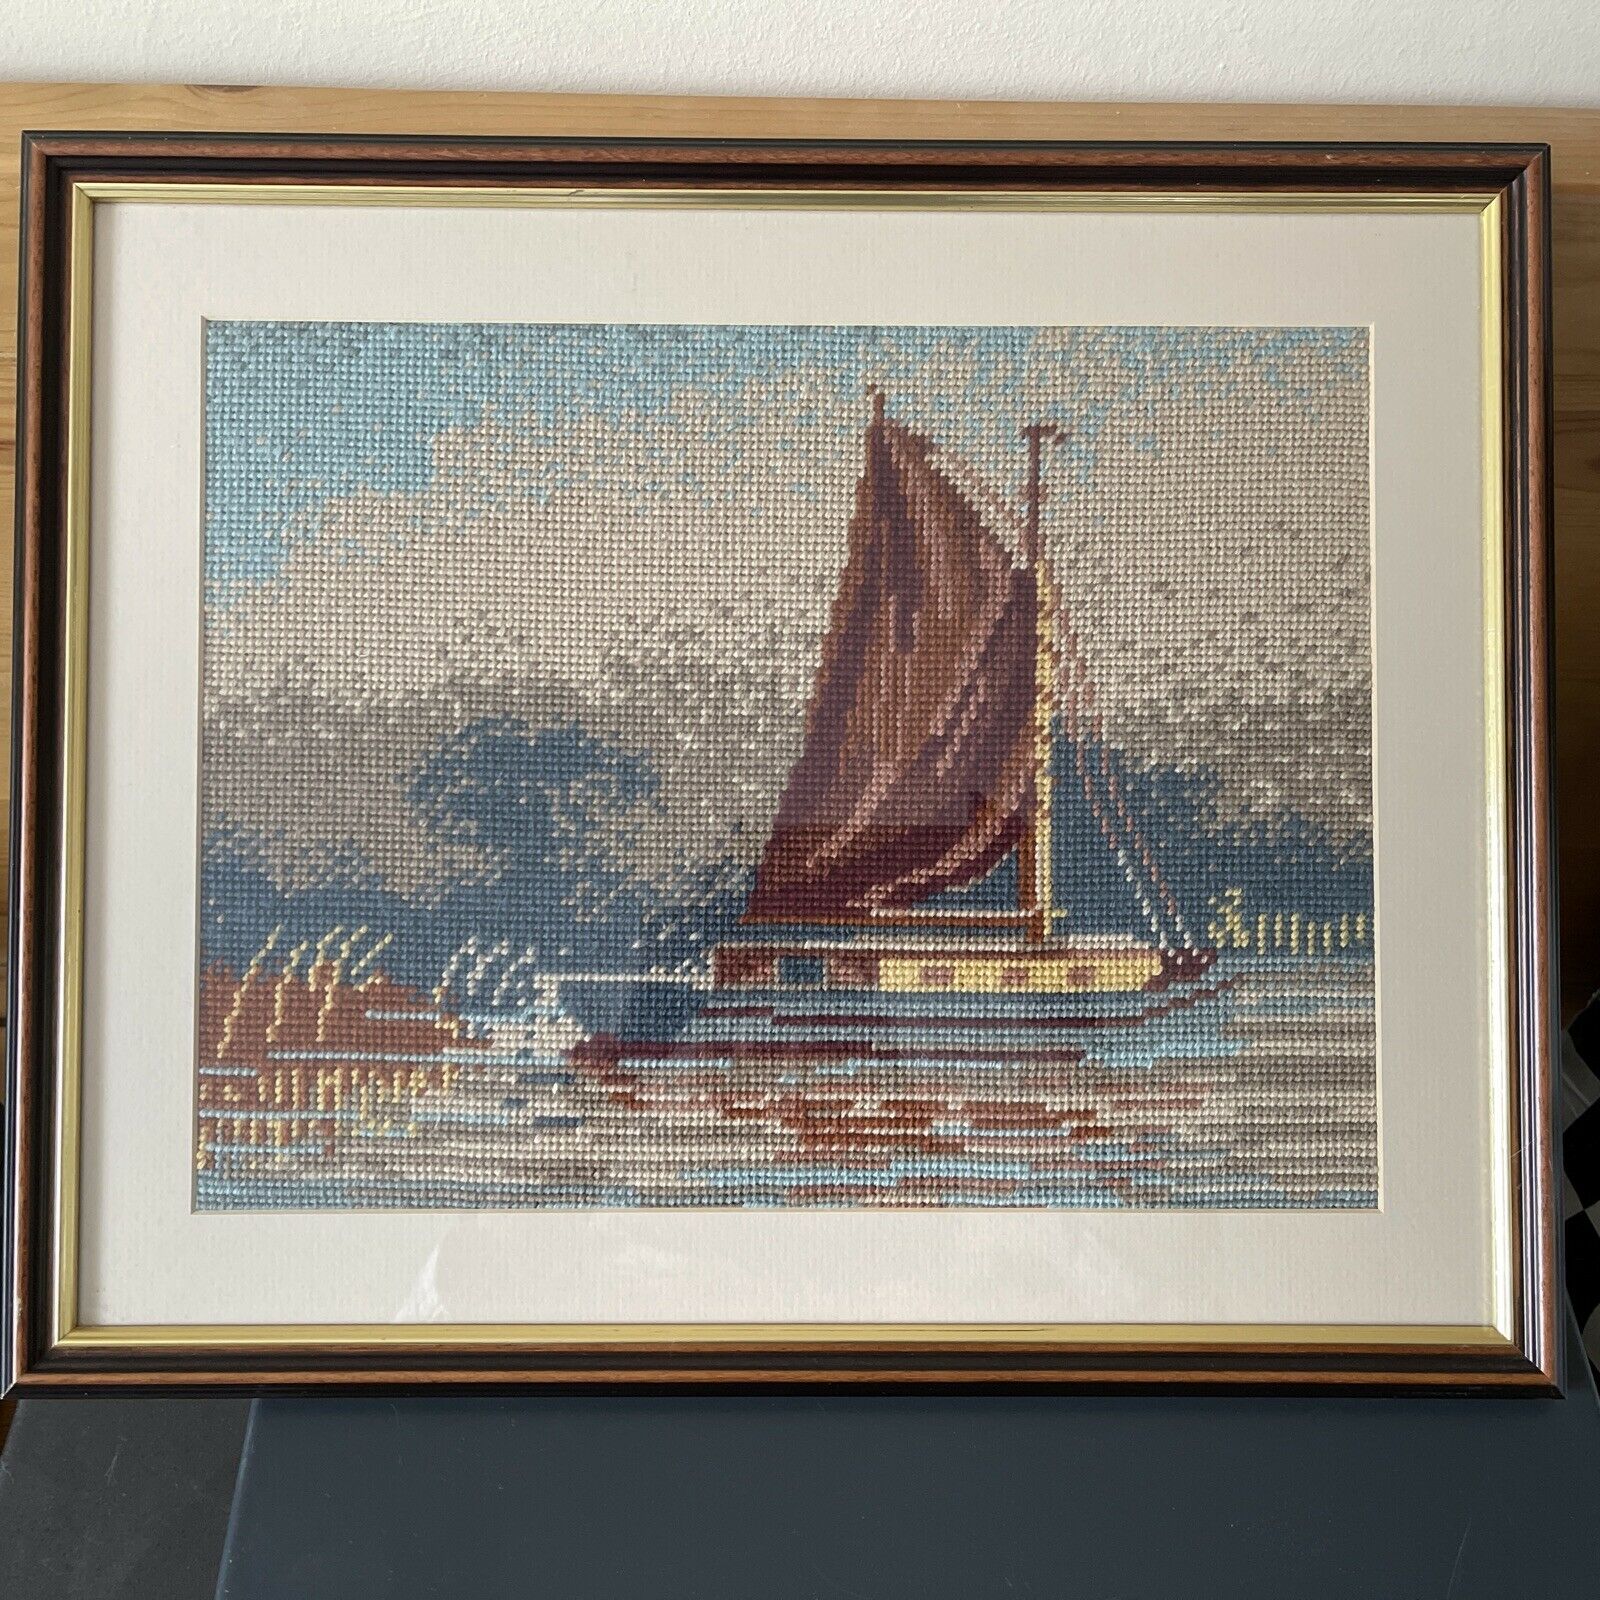 LOVELY FRAMED TAPESTRY OF A BOAT~BUY WITH OR WITHOUT FRAME